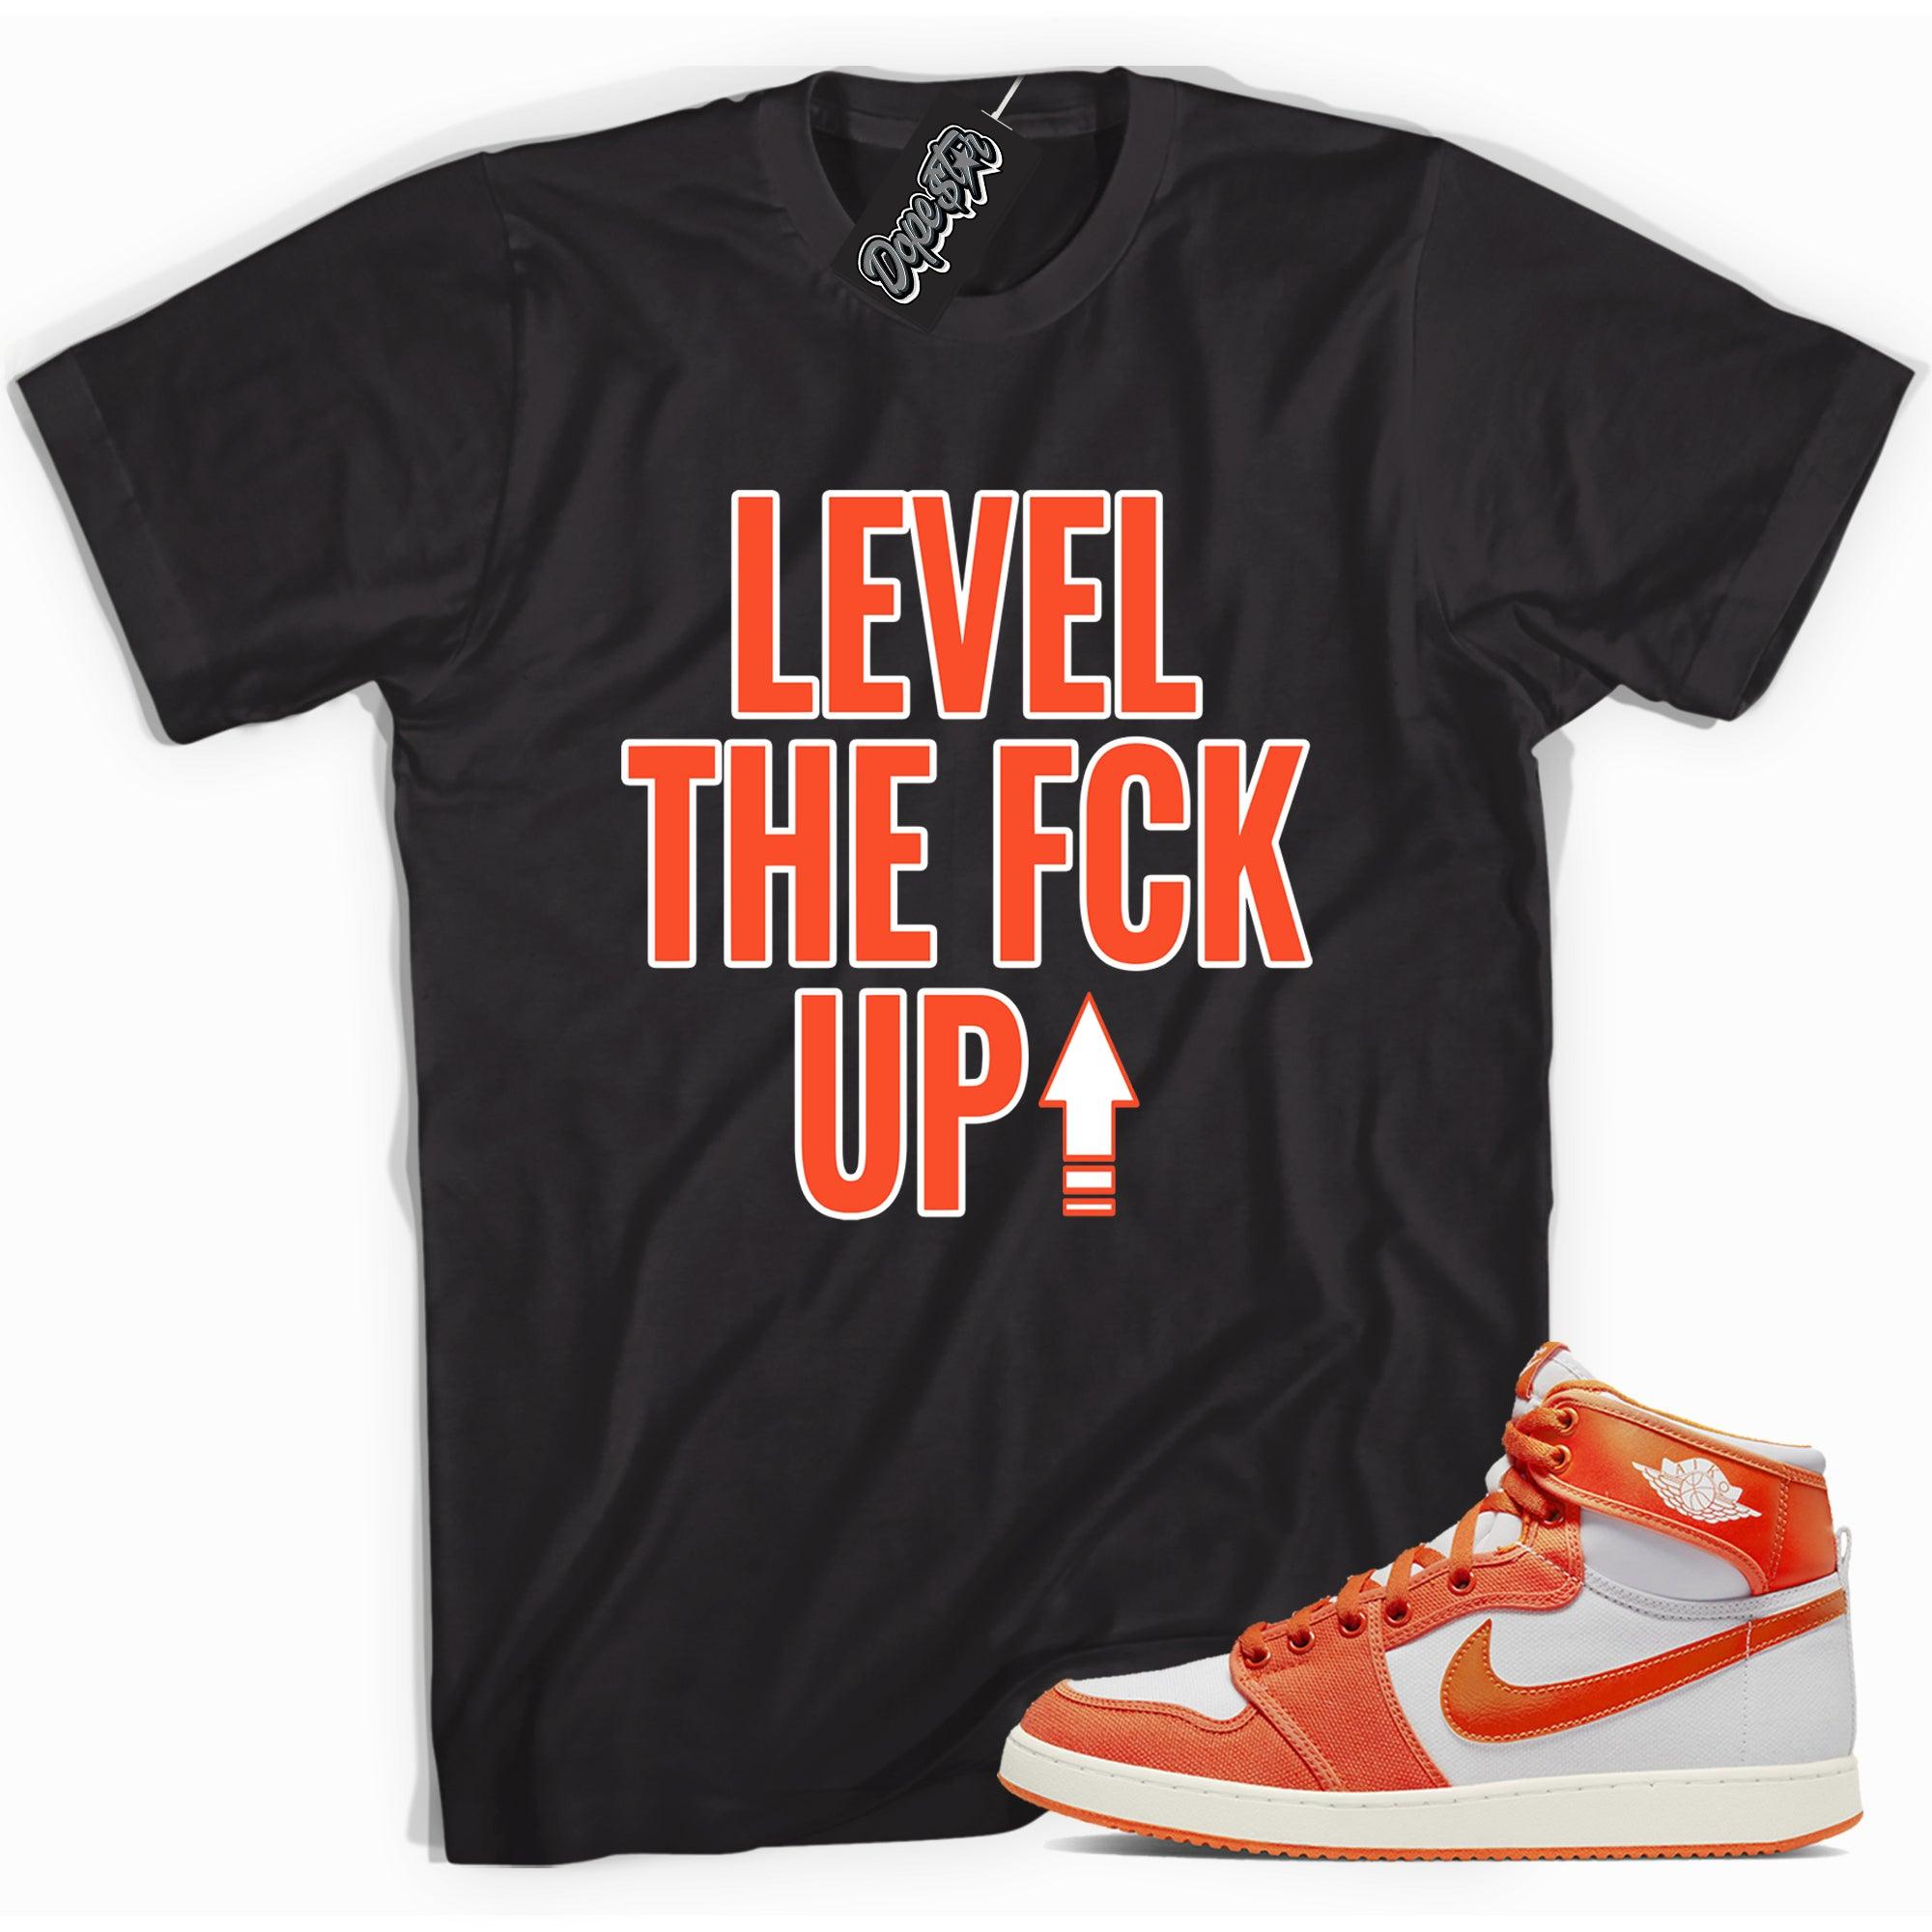 Cool black graphic tee with 'Level Up' print, that perfectly matches Air Jordan 1 KO syracuse sneakers.